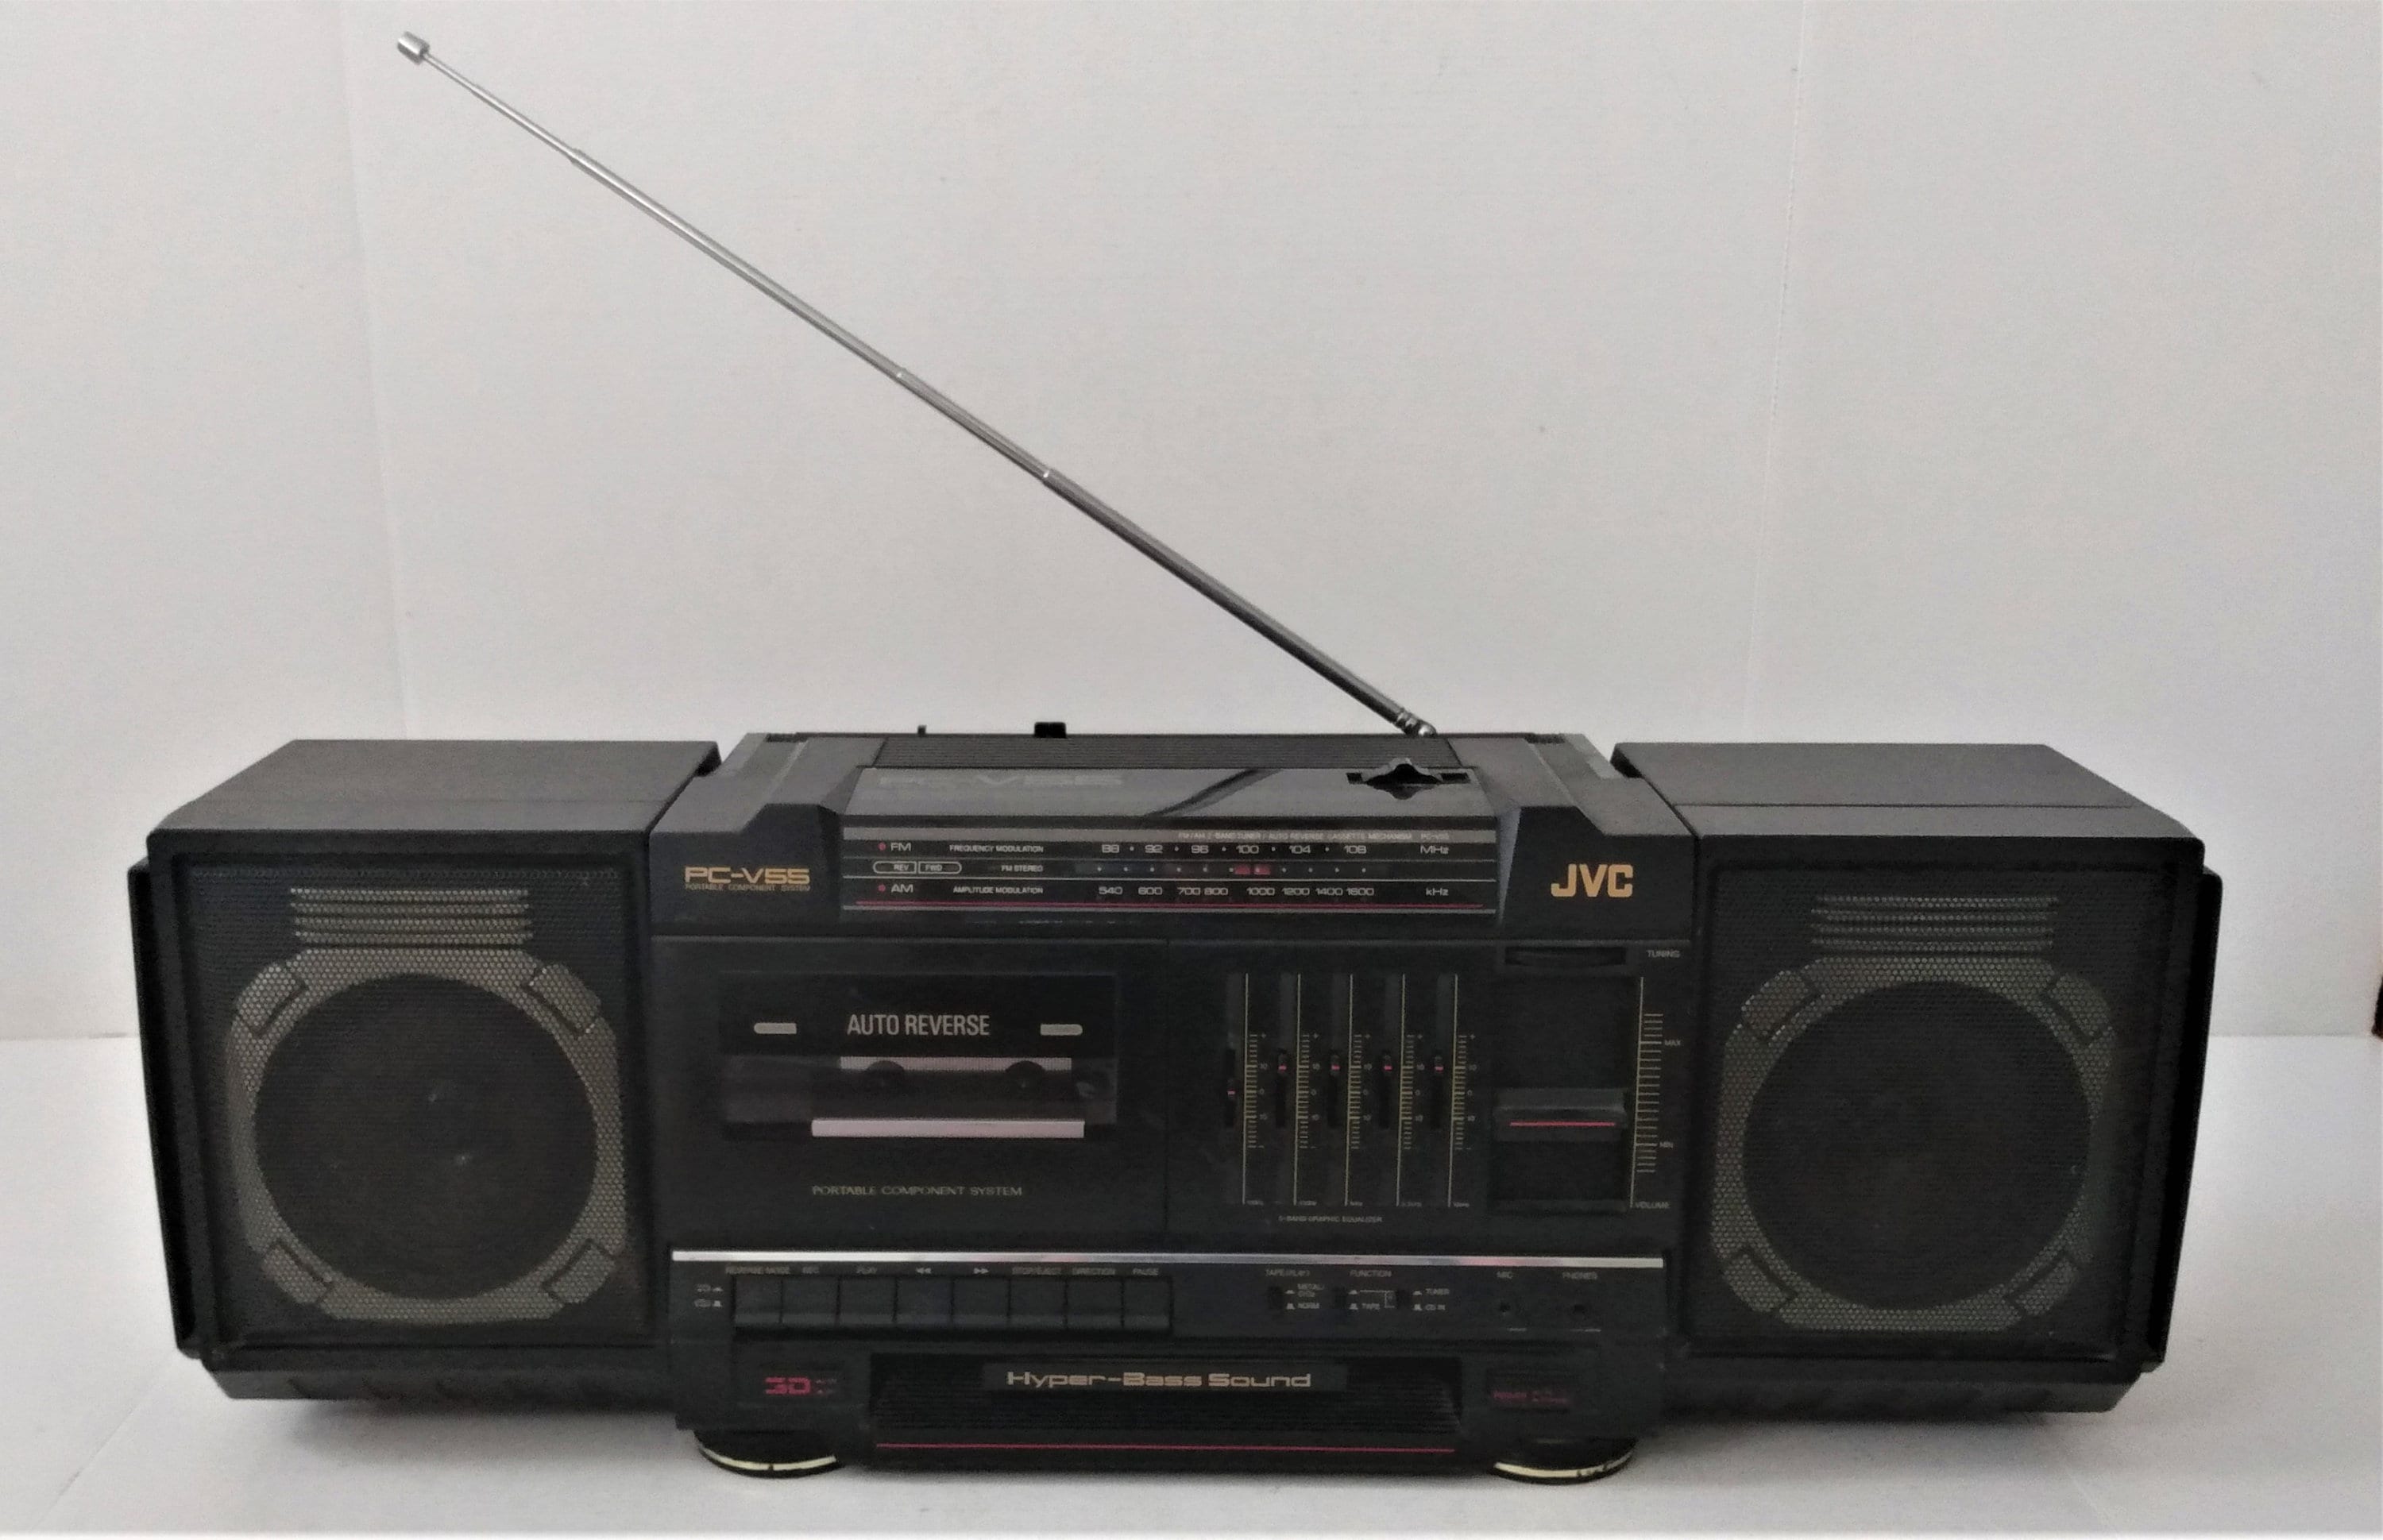 EQUALIZER JVC PC-90 BOOMBOX CASSETTE PLAYER RADIO STATION WORKS